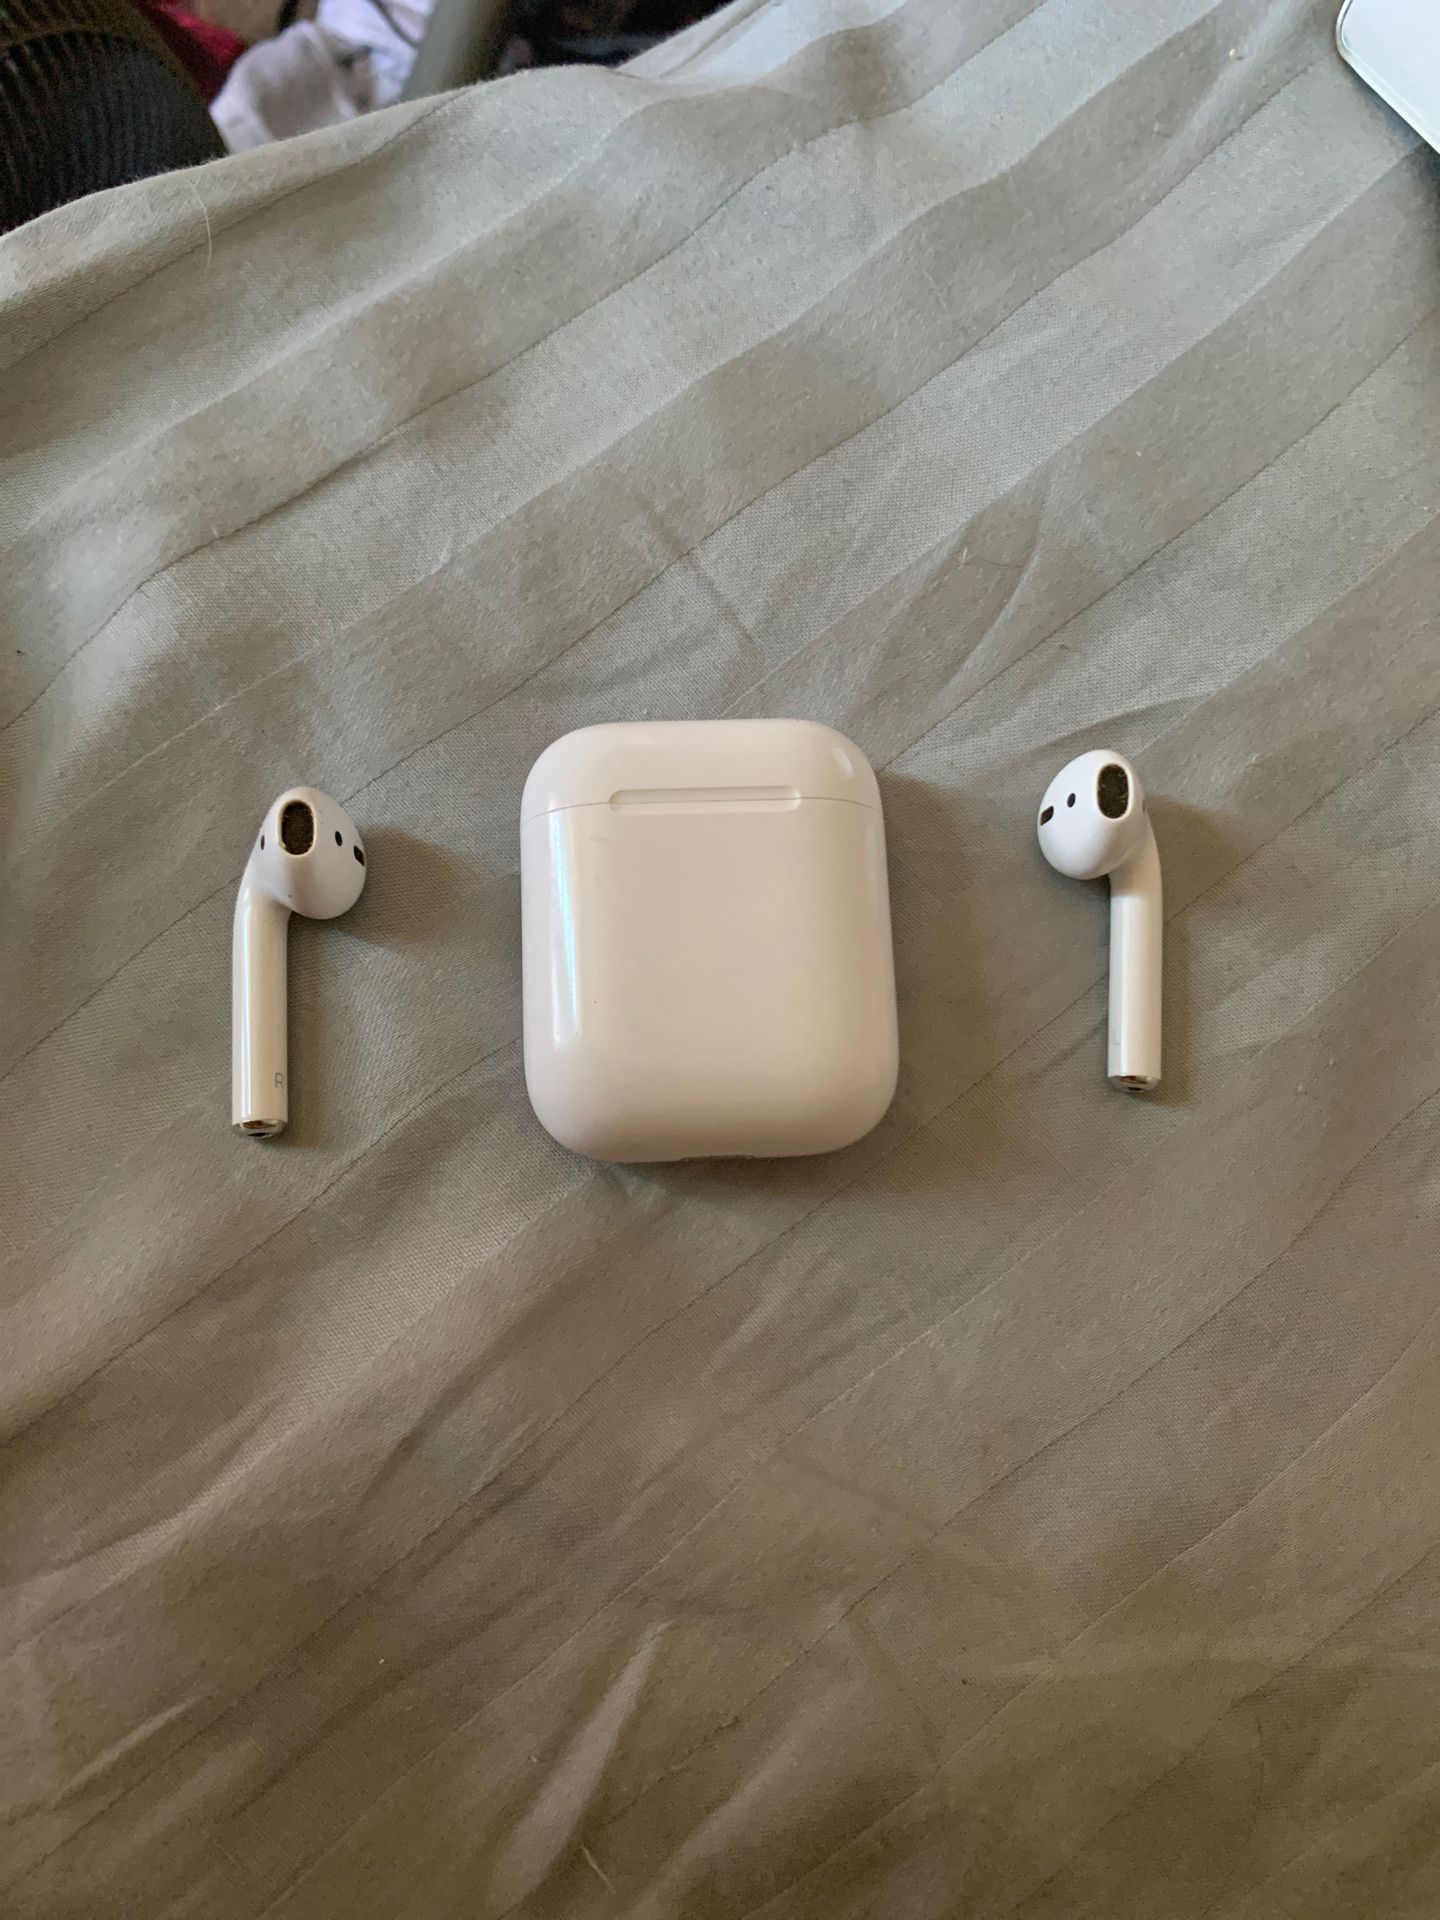 Mismatched AirPods